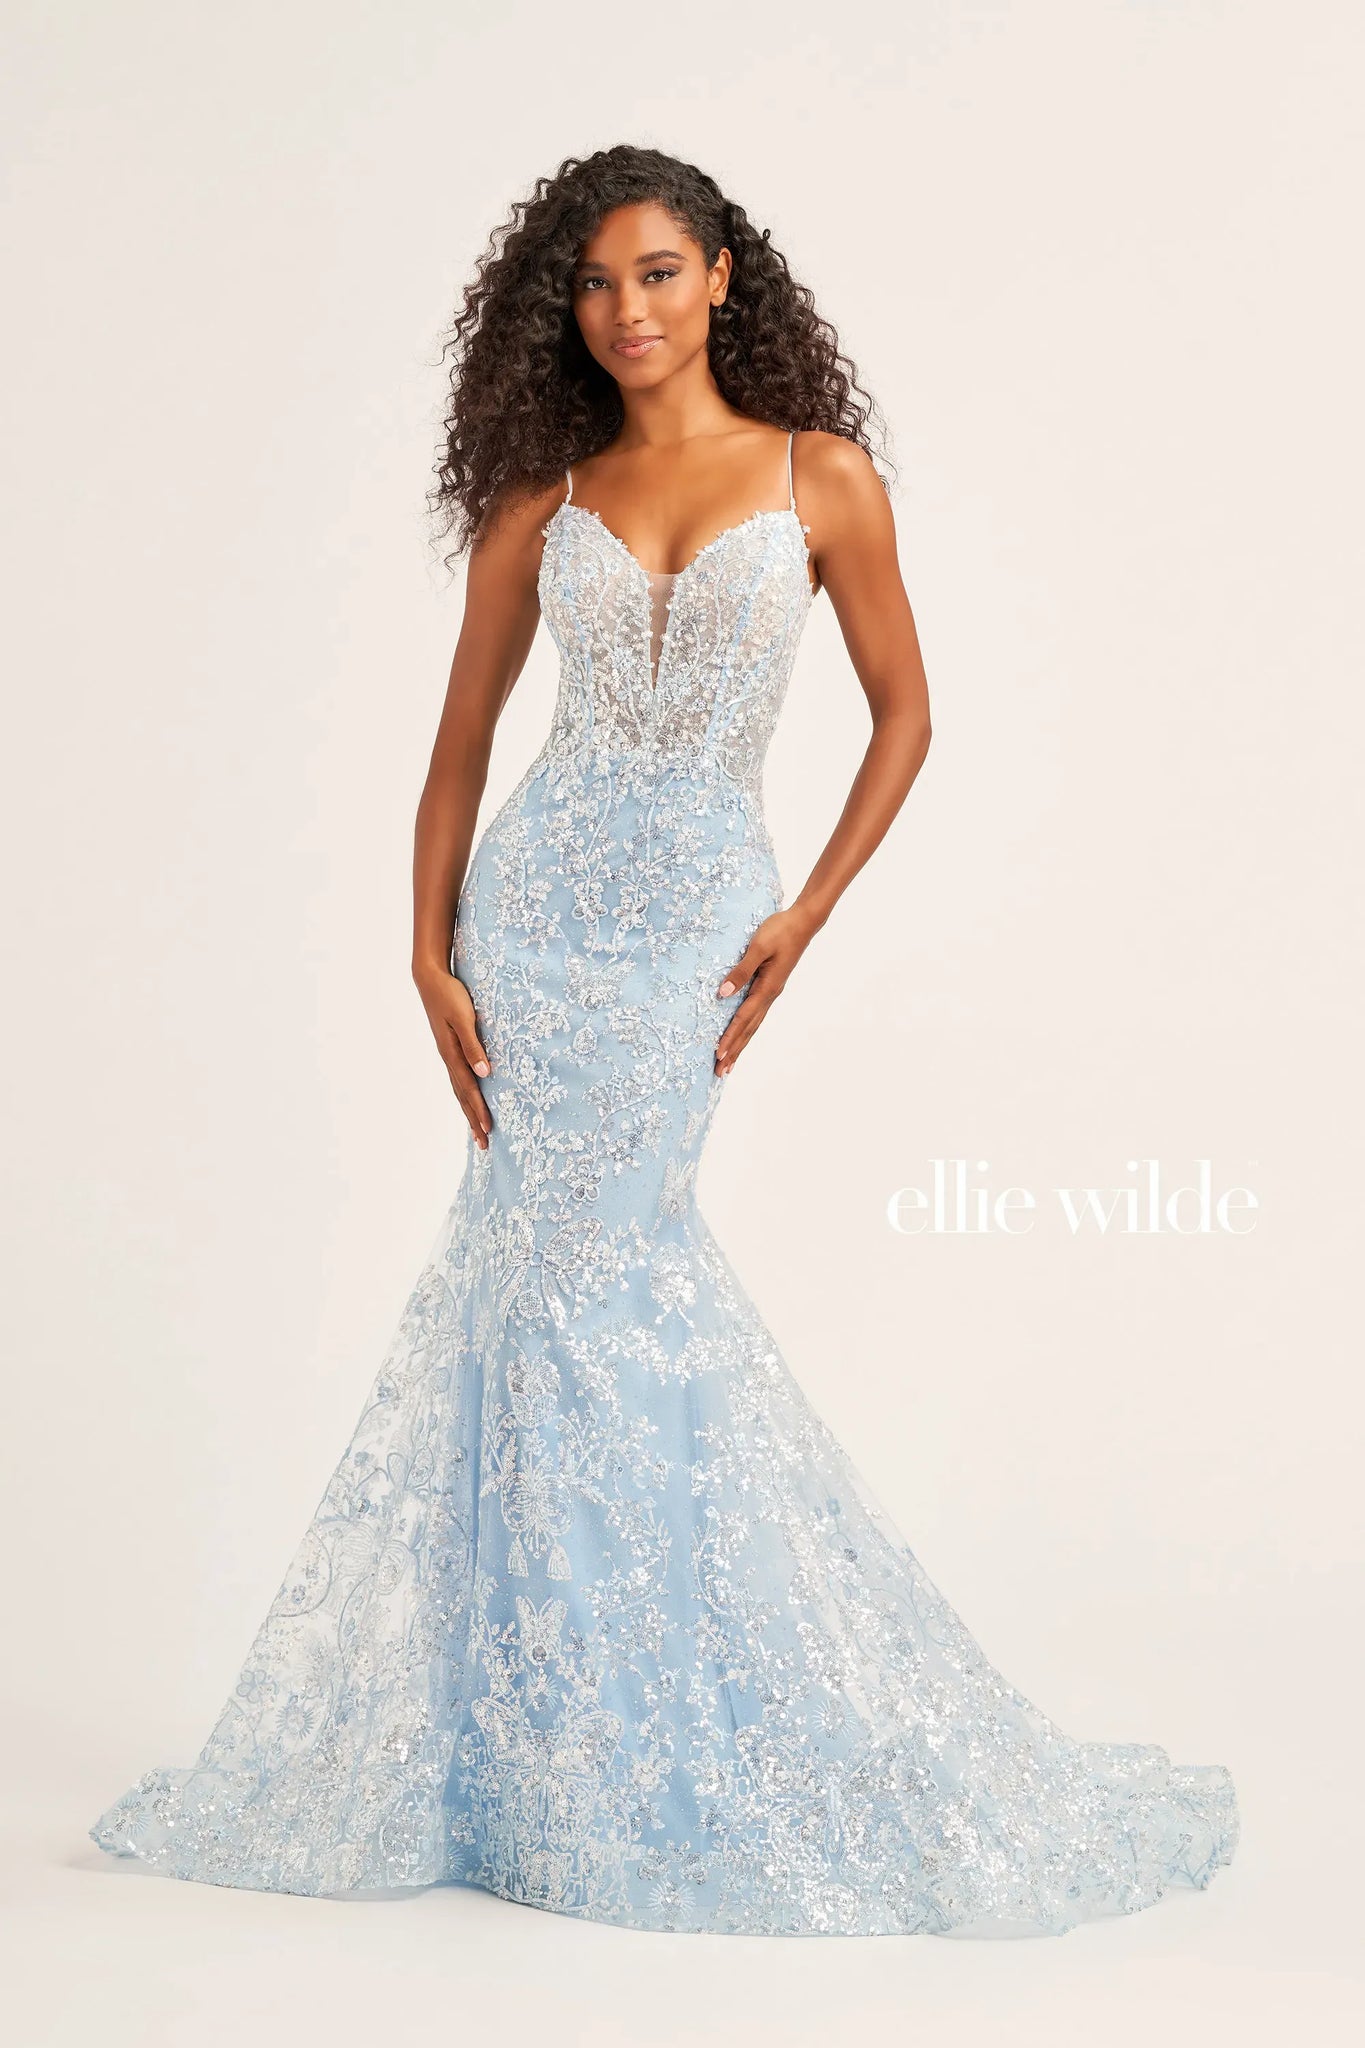 Show off your figure when you wear this body con fitted silhouette by Ellie Wilde style EW35013. This mesmerizing dress features a lovely v neckline with simple straps and eye catching lace up open back. Stunning embroidery and soft glitter tulle covers this number from top to bottom ensuring all heads turn towards you.